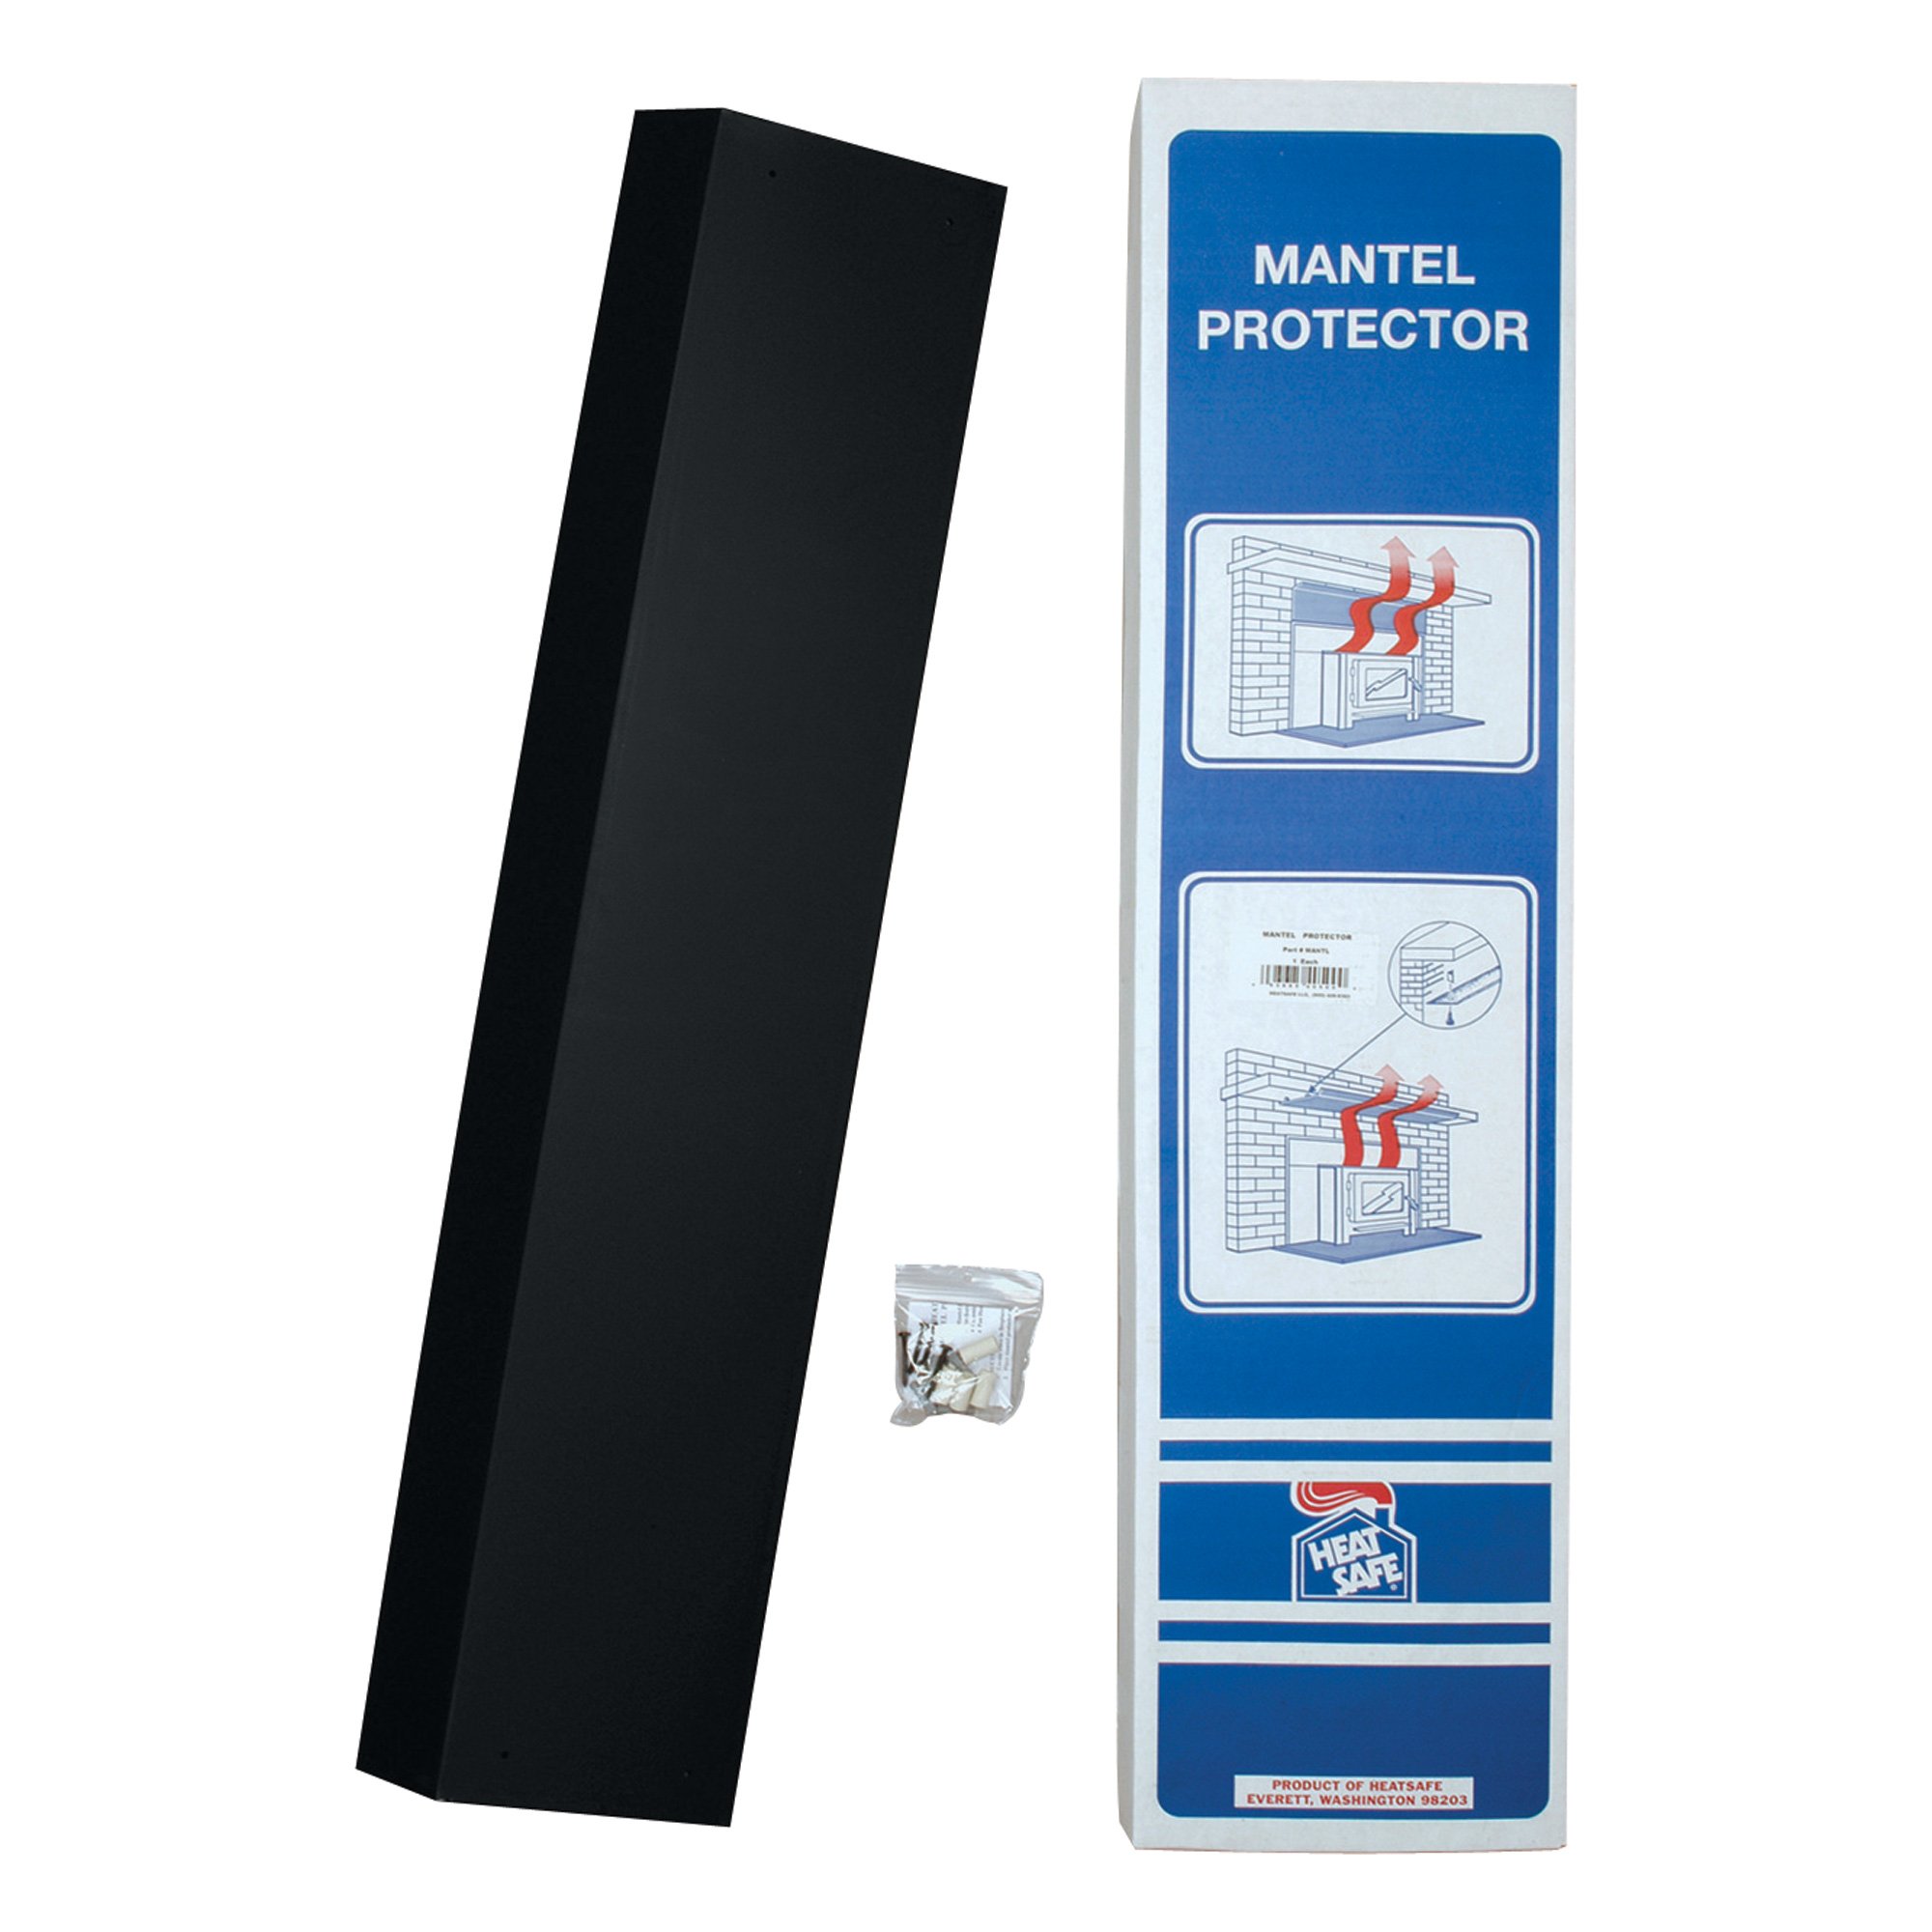 Mantel Protector - MEECO's Red Devil